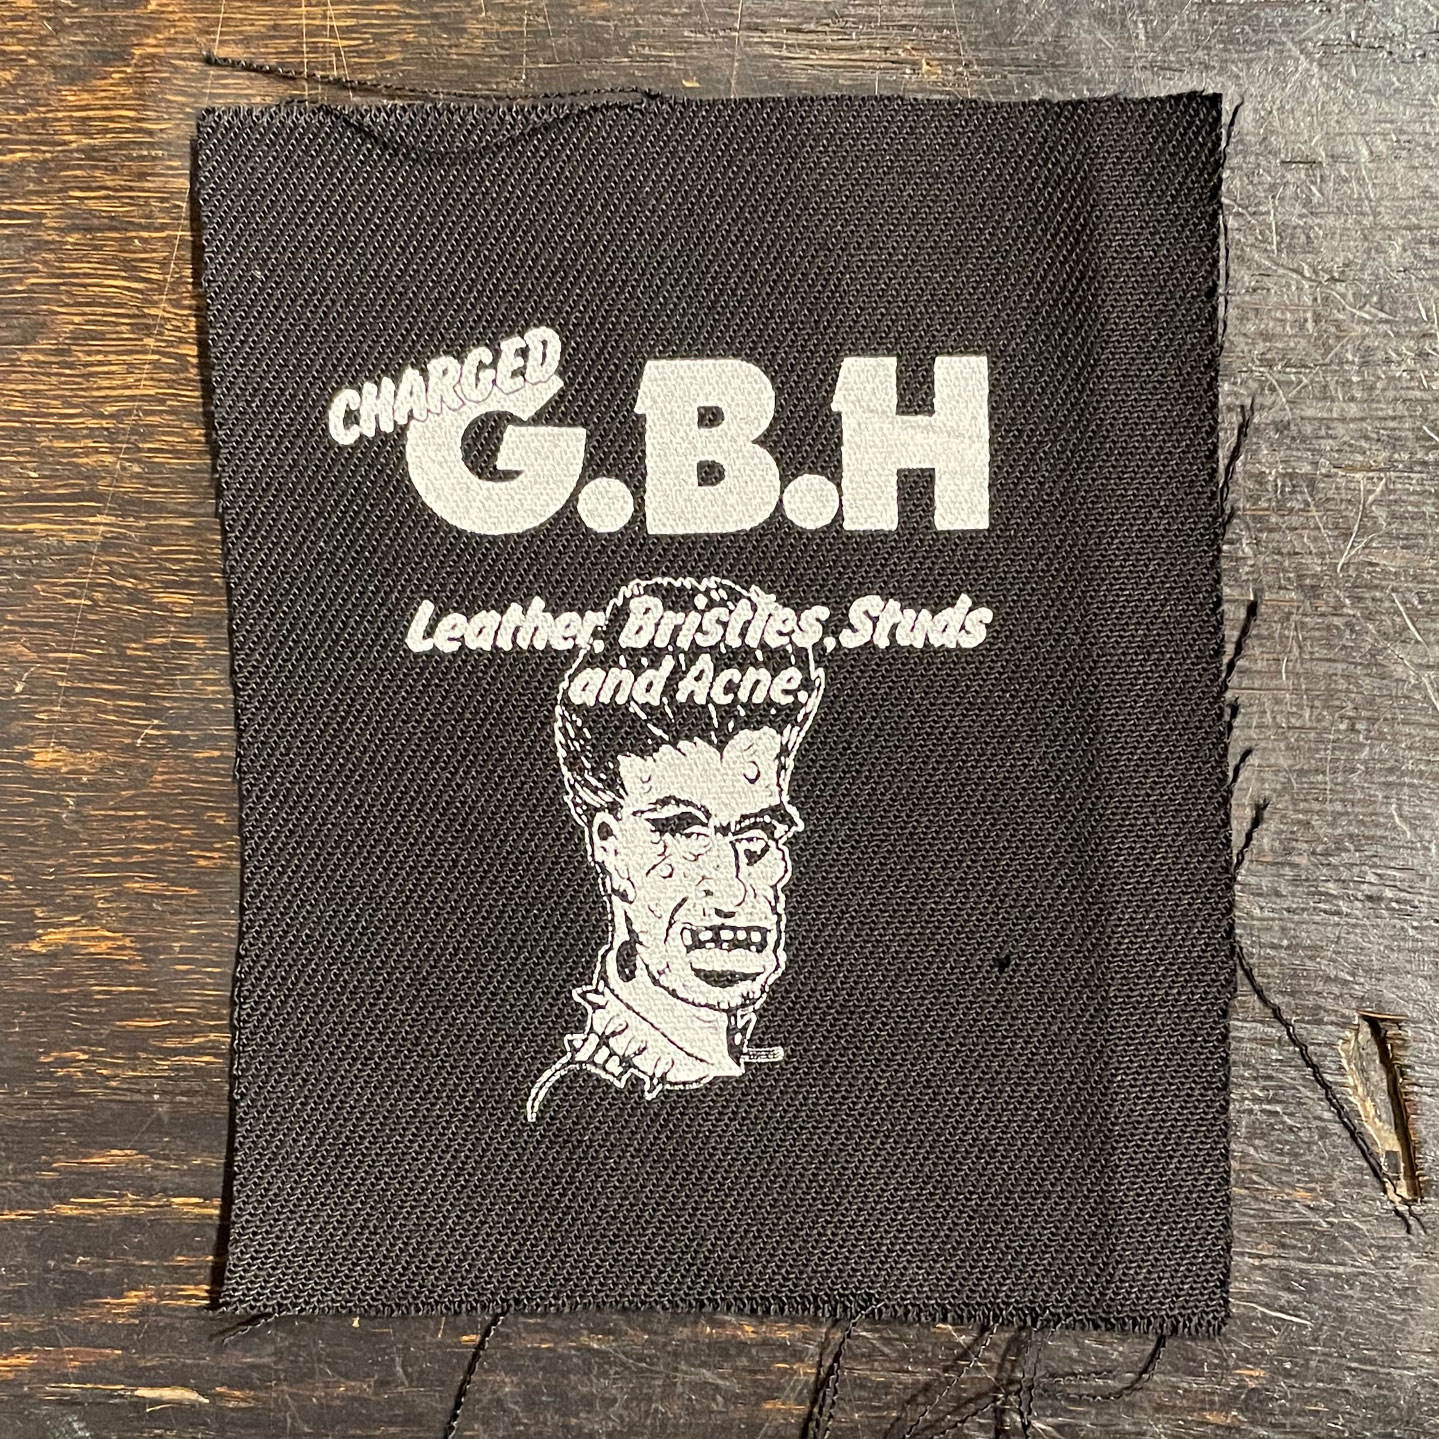 G.B.H PATCH Leather, Bristles, Studs And Acne